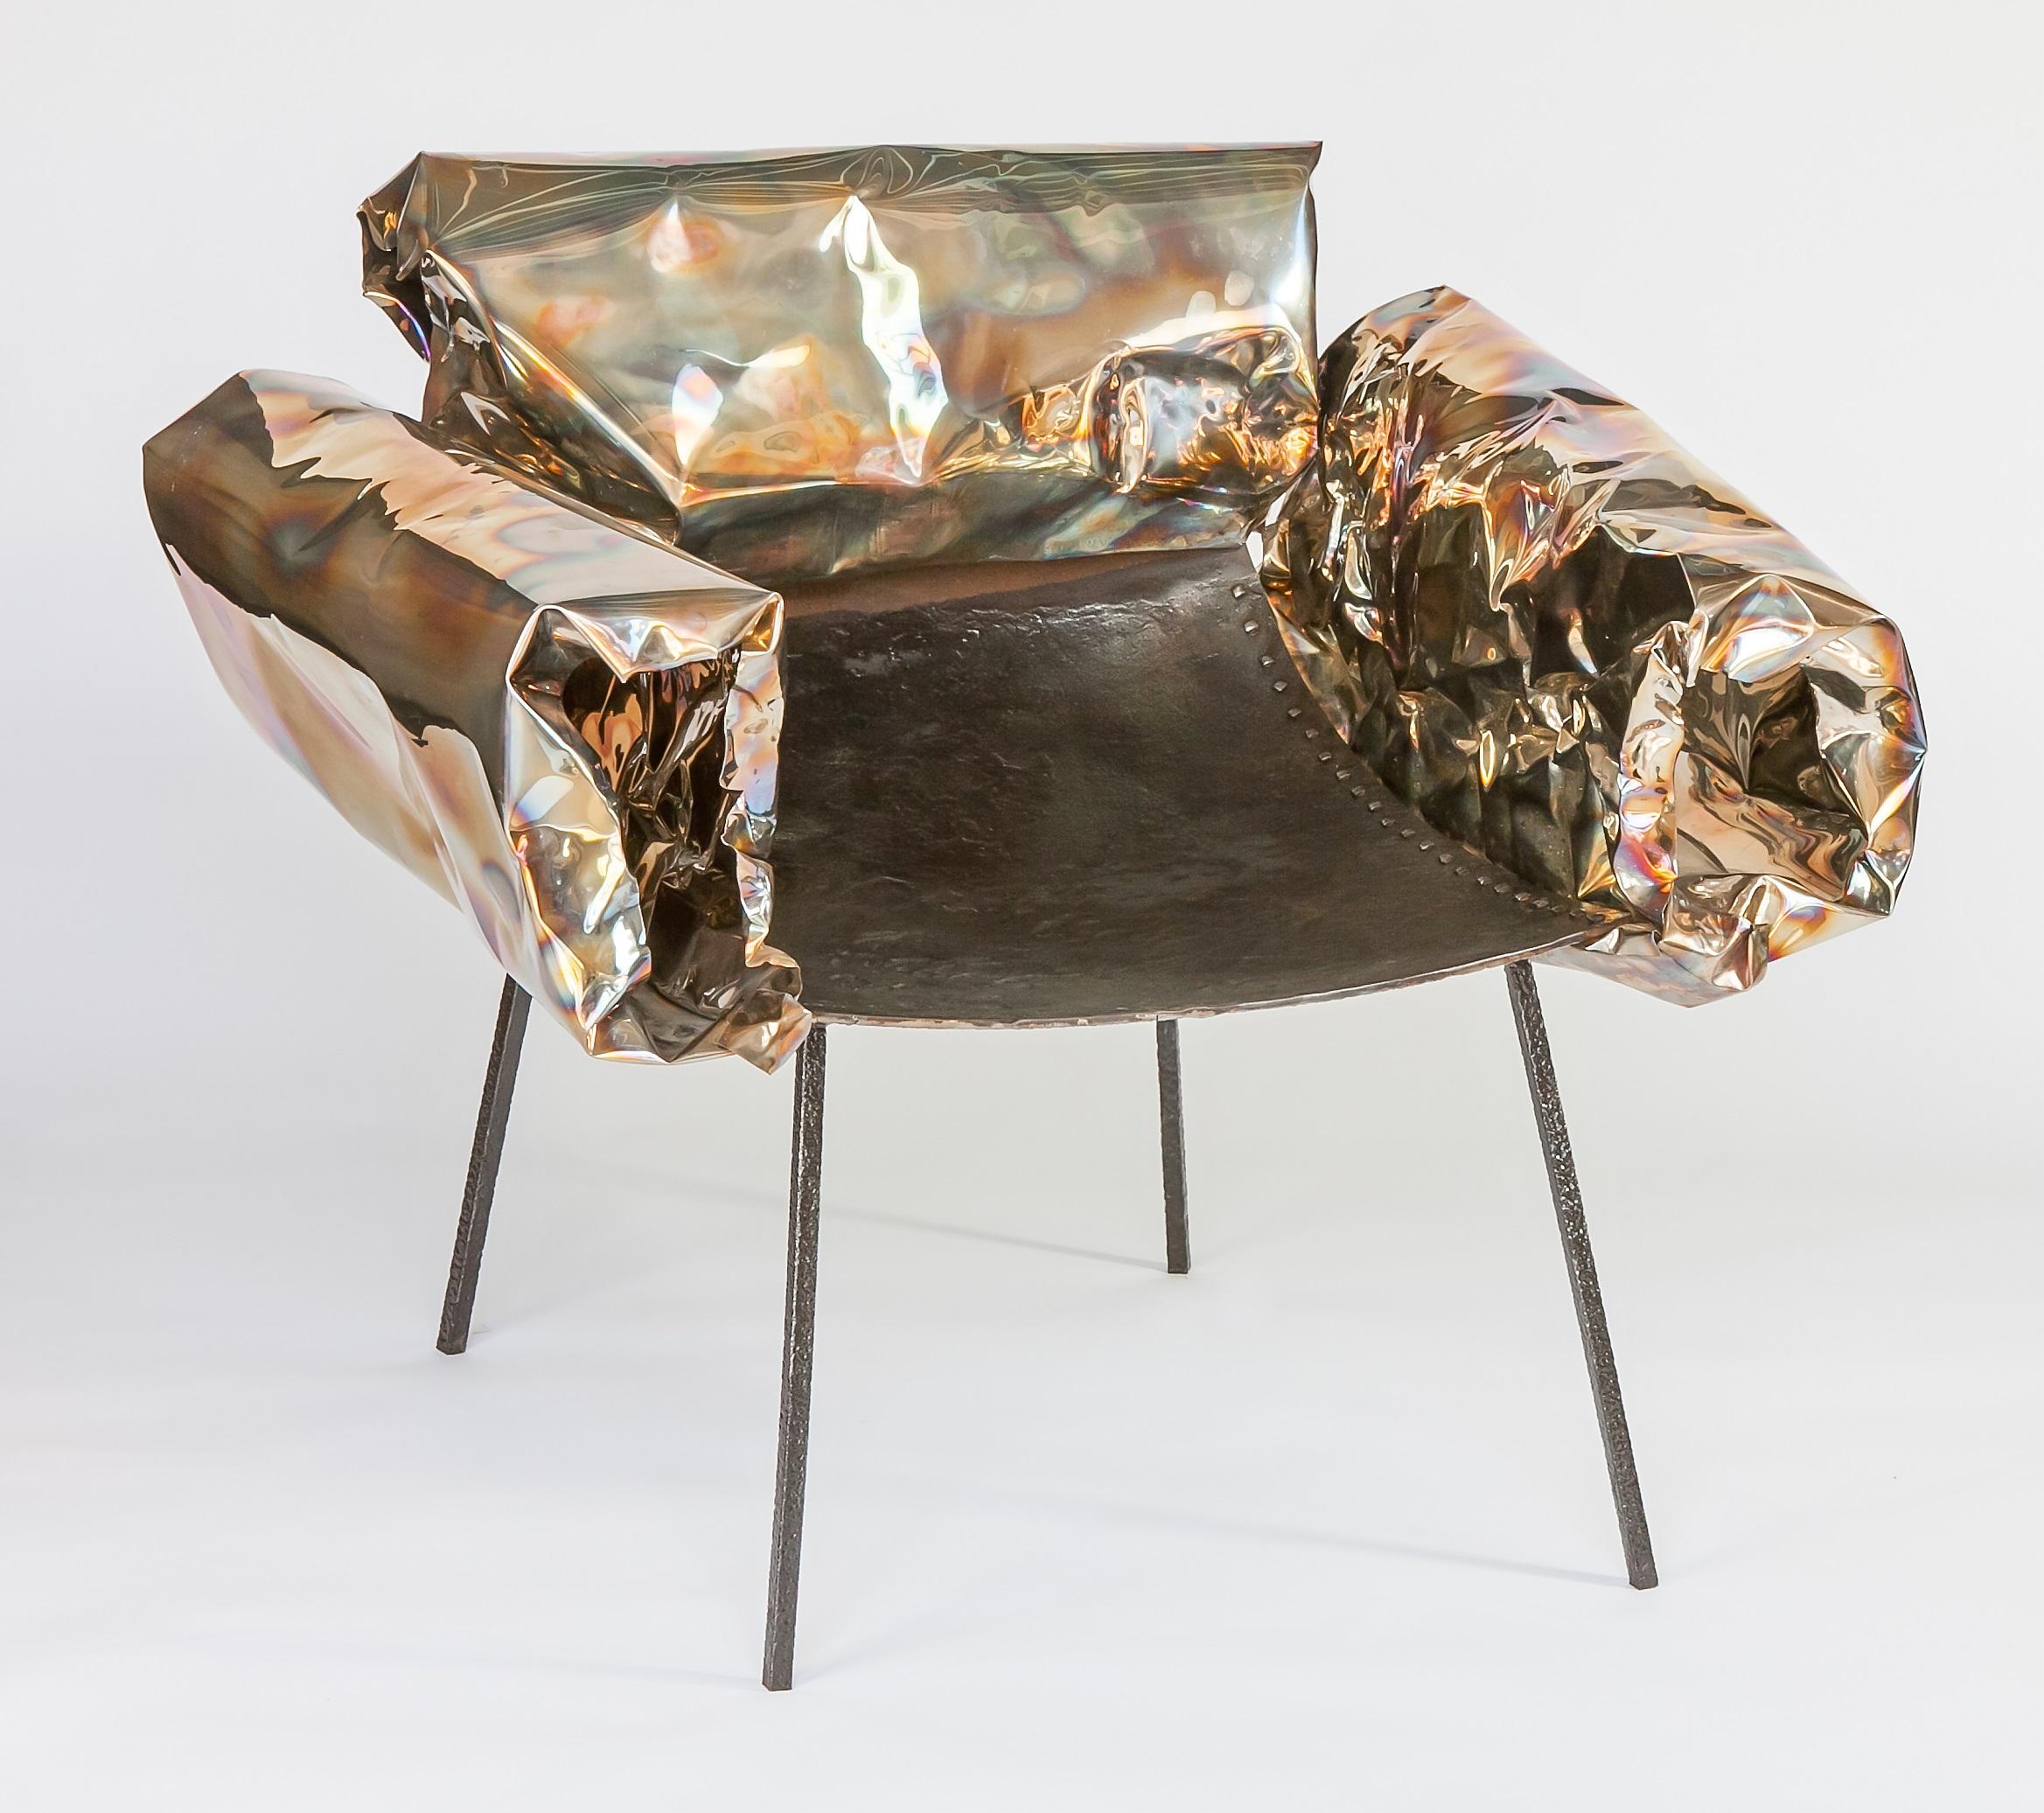 Modern Stainless Steel Iron Puffy Chair by Anadora Lupo  For Sale